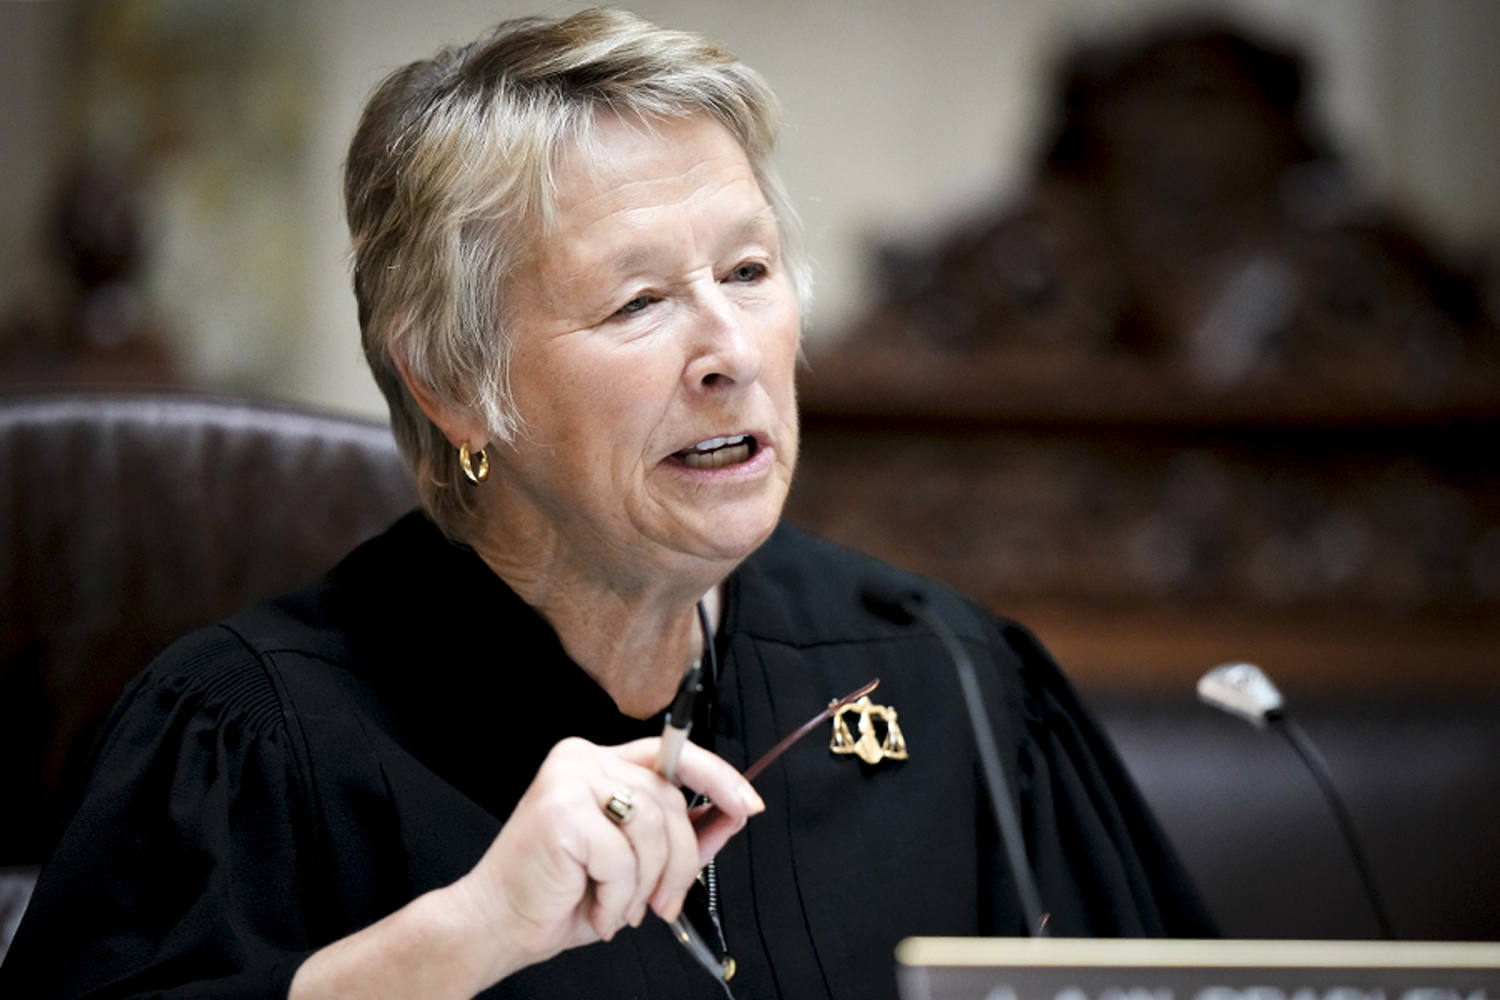 Wisconsin Supreme Court justice to retire, putting liberals' majority at stake next year